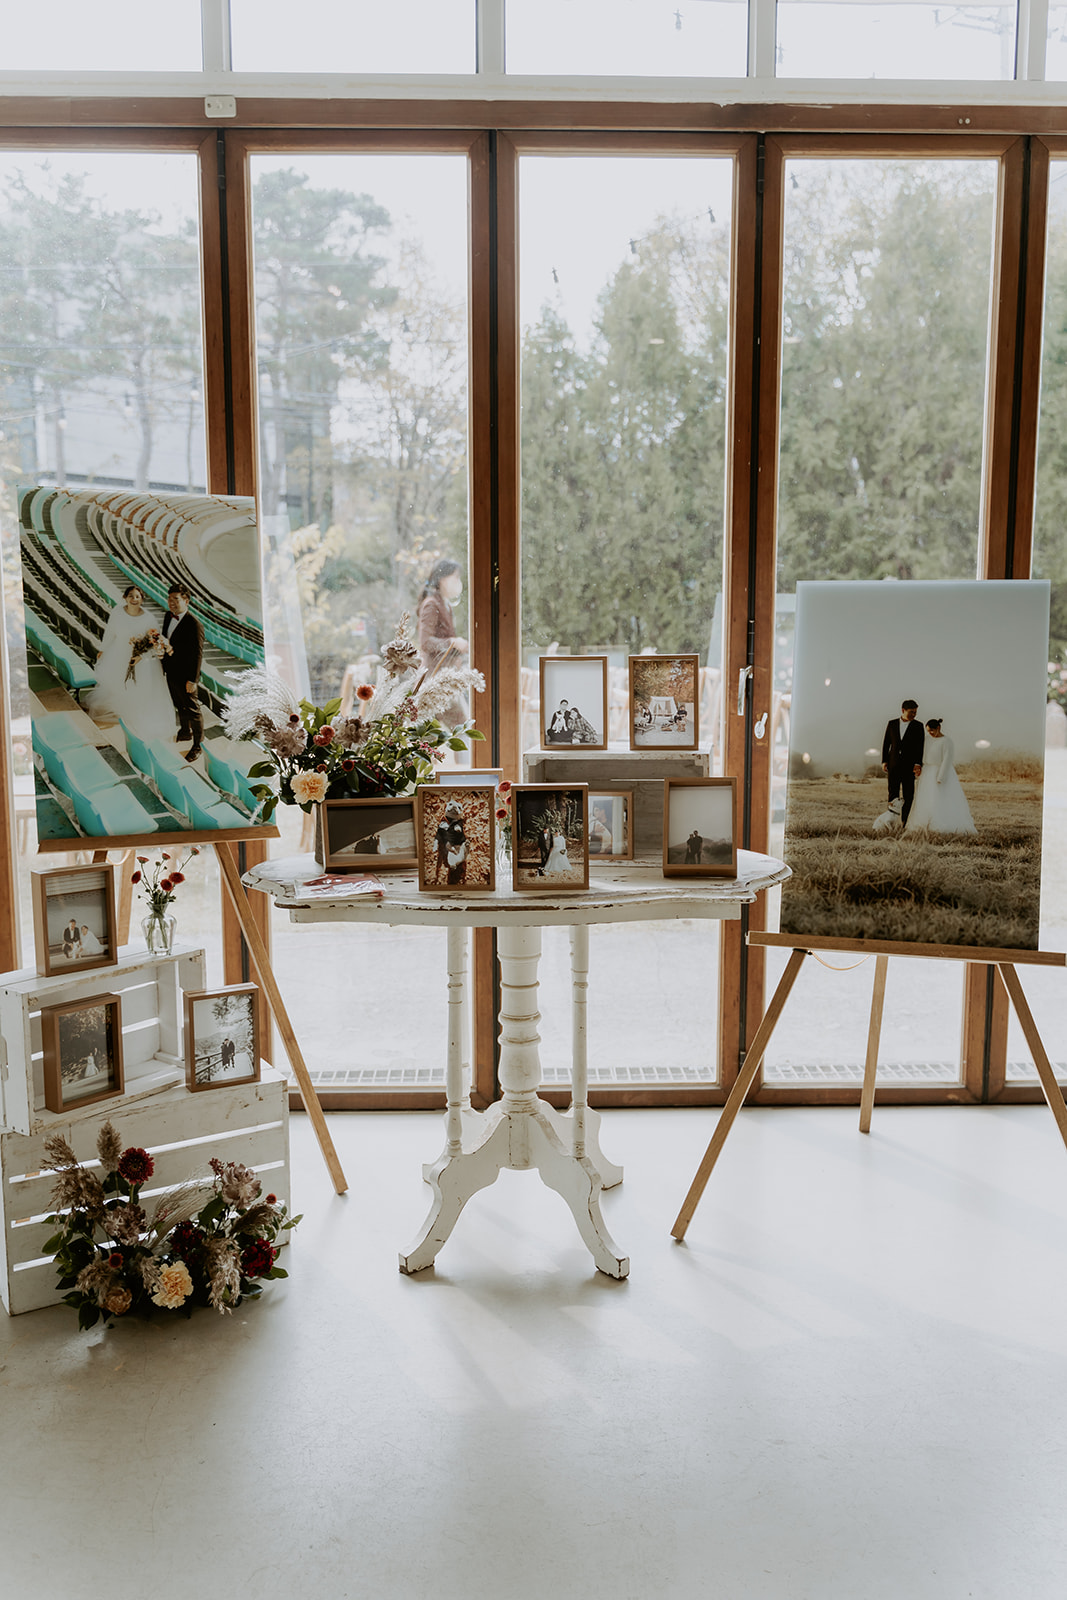 A wedding photo display featuring frames on a shelf, easels, and a table with floral decorations in a room.